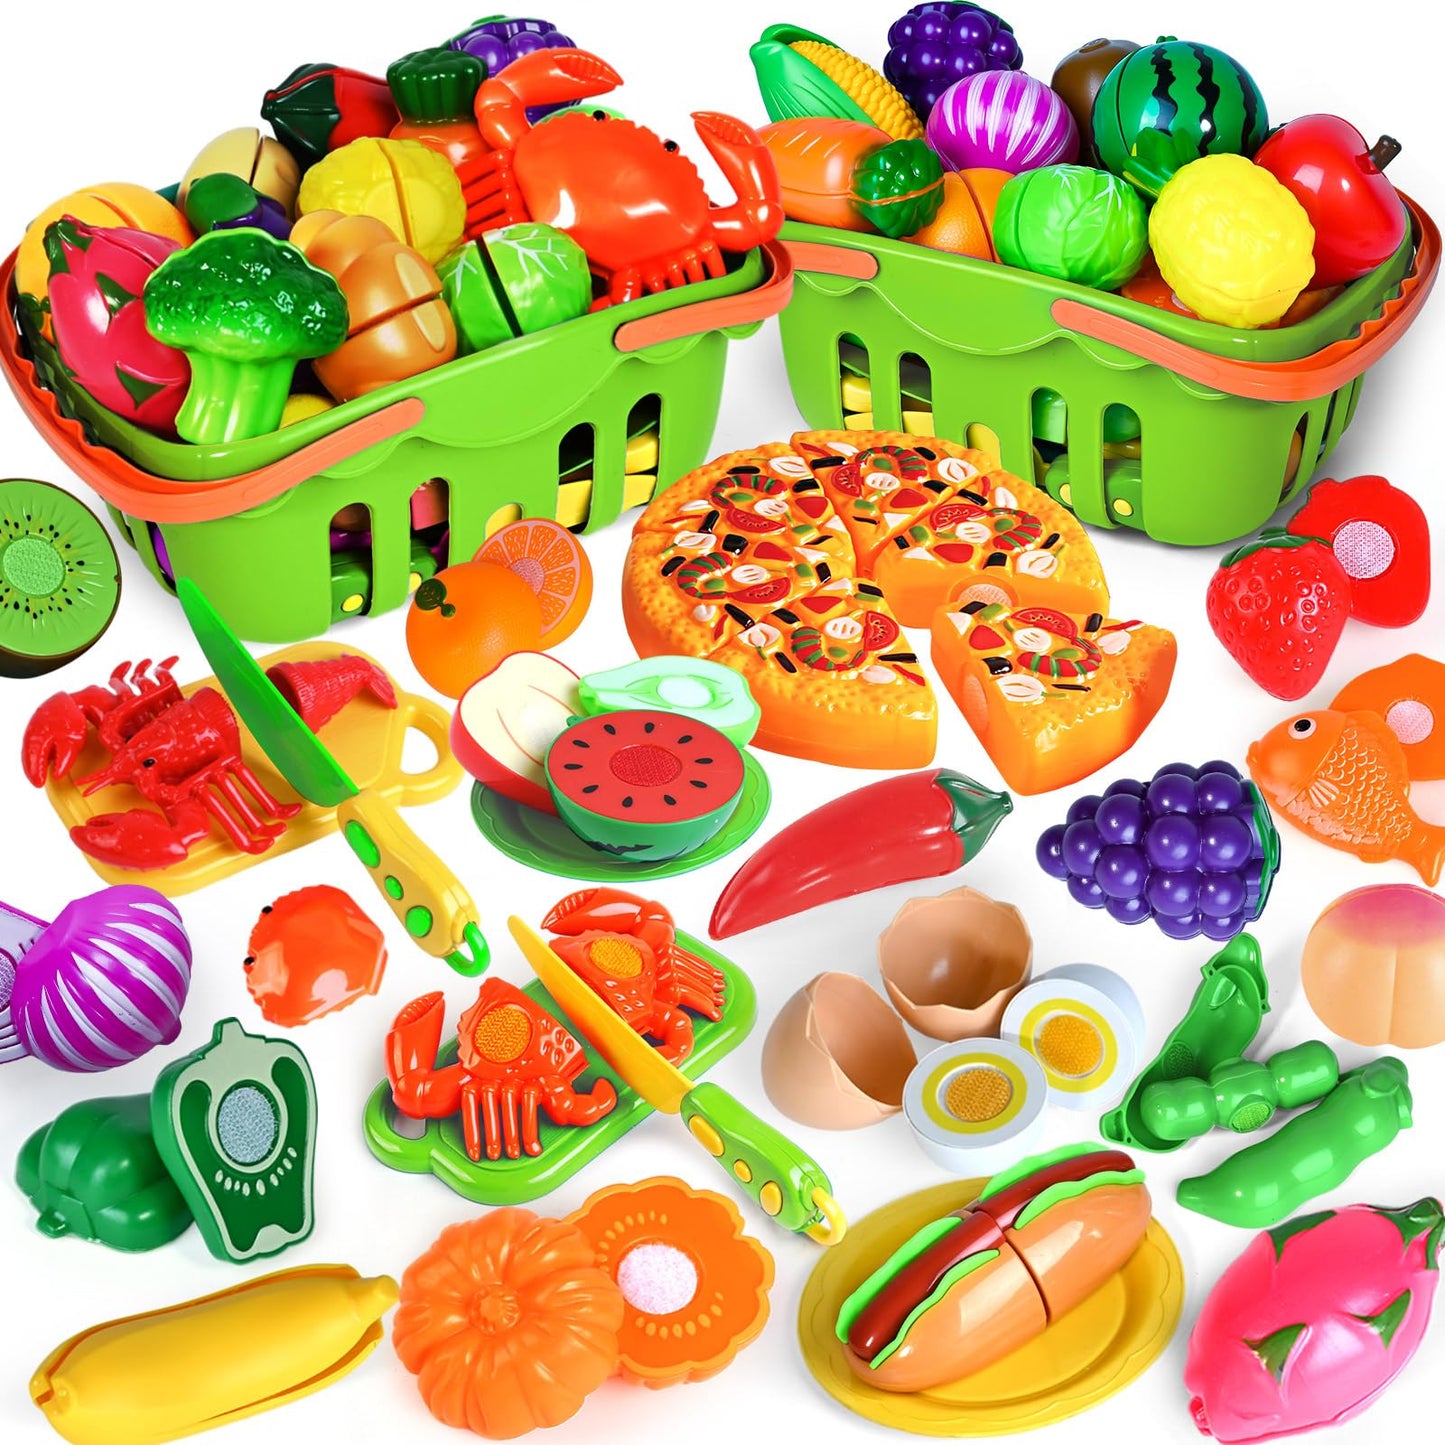 100 PCS Play Food Toy for Kids Toddler Toys, Pretend Food Toys for Toddlers, Play Kitchen Accessories with 2 Baskets, Cutting Food Toys, Christmas